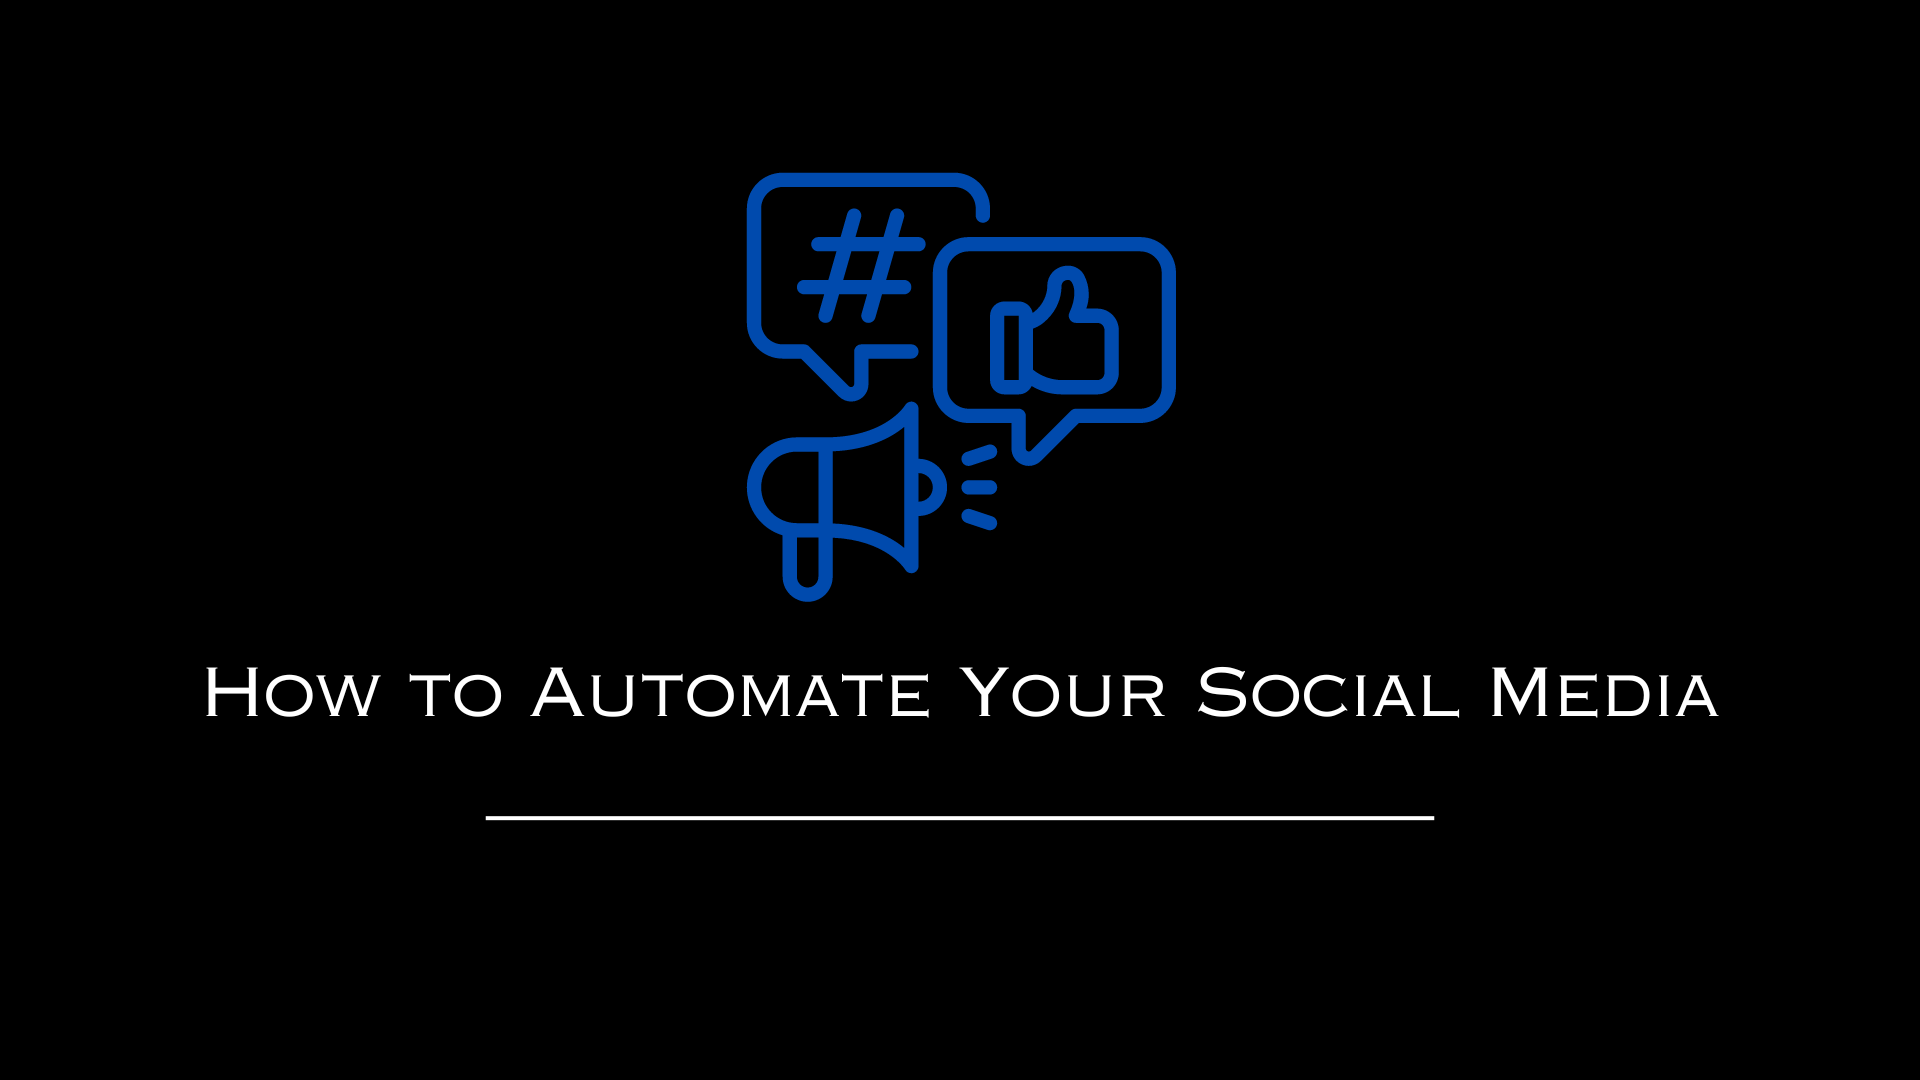 Automate Your Social Media